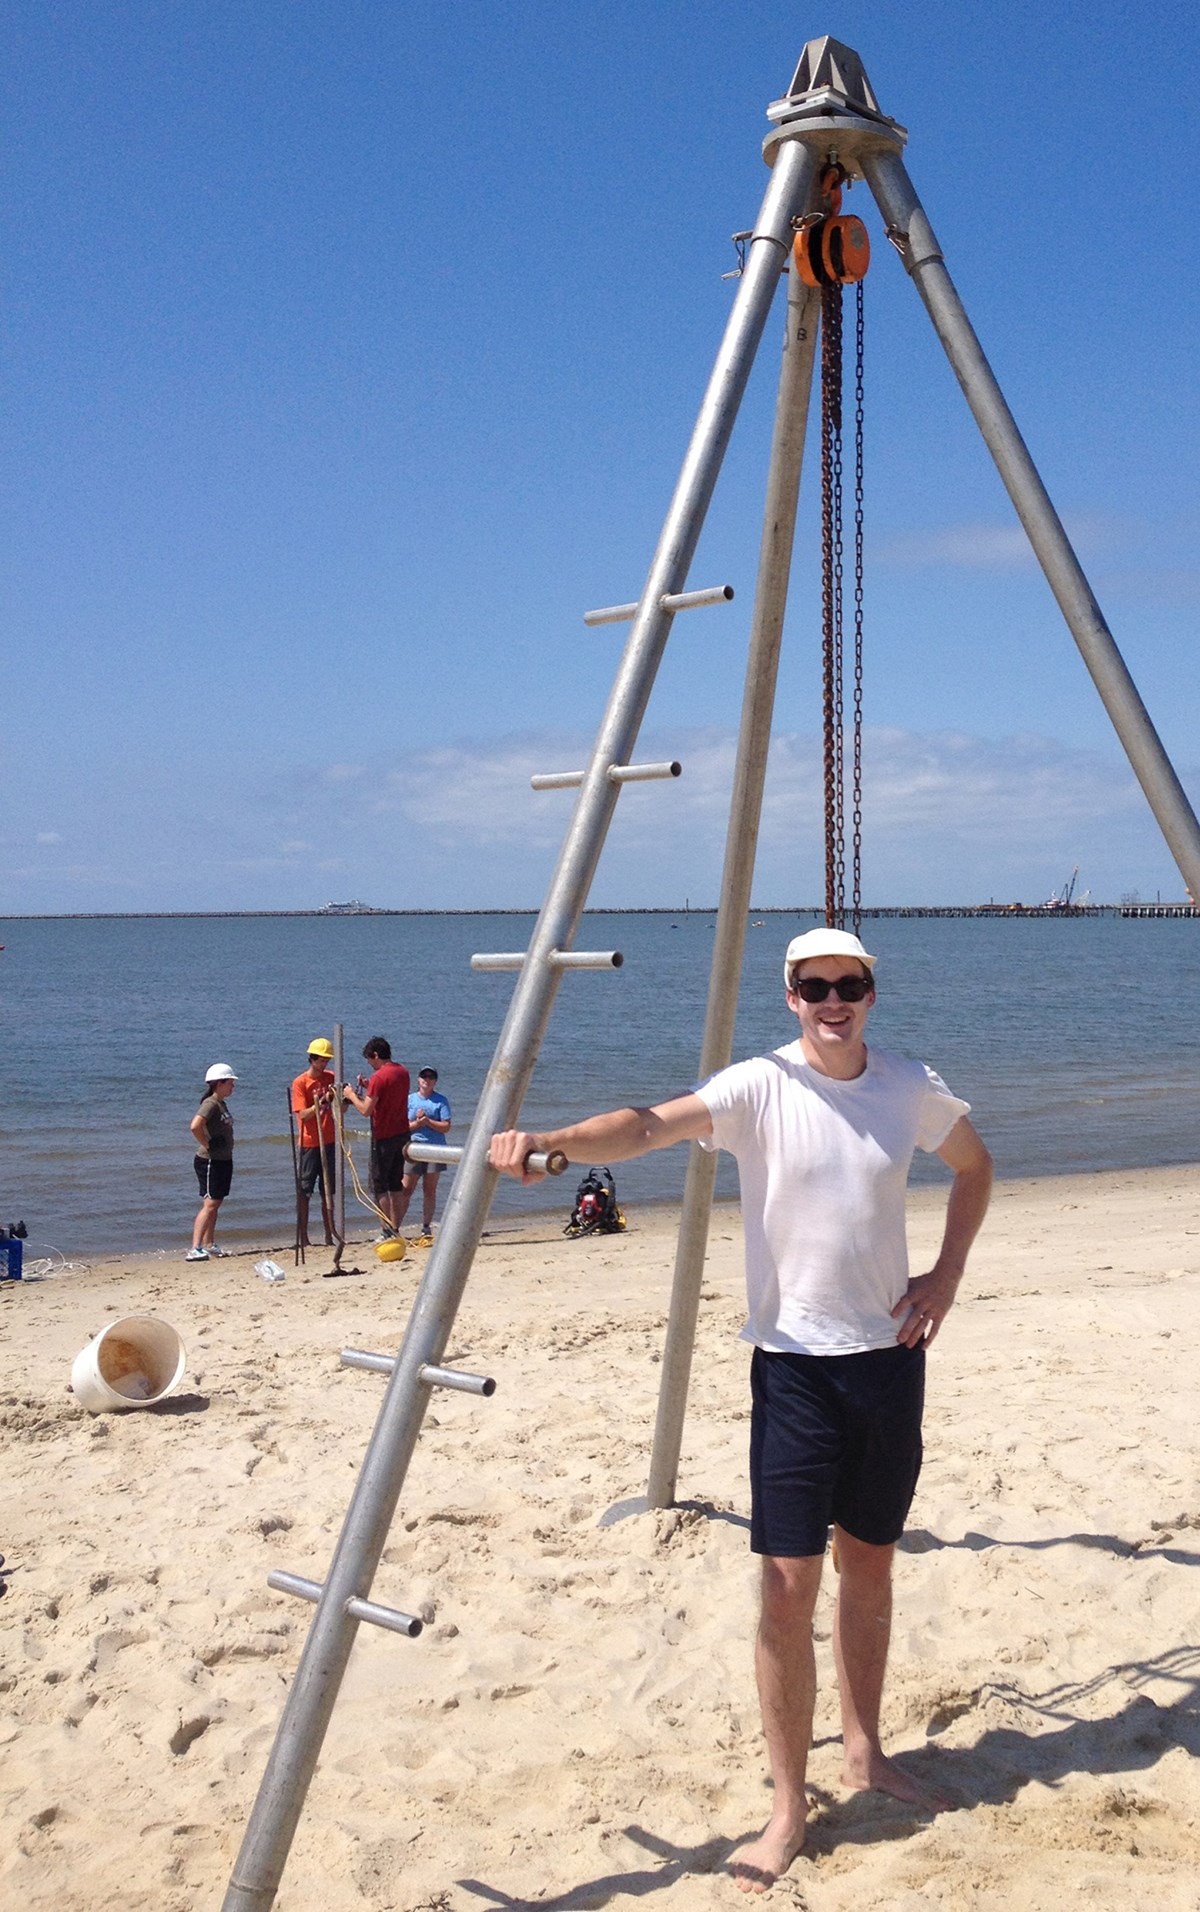 Assistant Professor James Heiss poses next to equipment at a beach. Heiss' research area is coastal groundwater dynamics and nutrient cycling in nearshore aquifers. I am interested in the influence of land-sea processes (tides, sea level rise, terrestrial recharge) on the exchange of water and chemicals between groundwater and surface water in estuarine, beach, bay, marsh, and marine environments. This work has direct implications for groundwater resources and water quality of coastal systems.